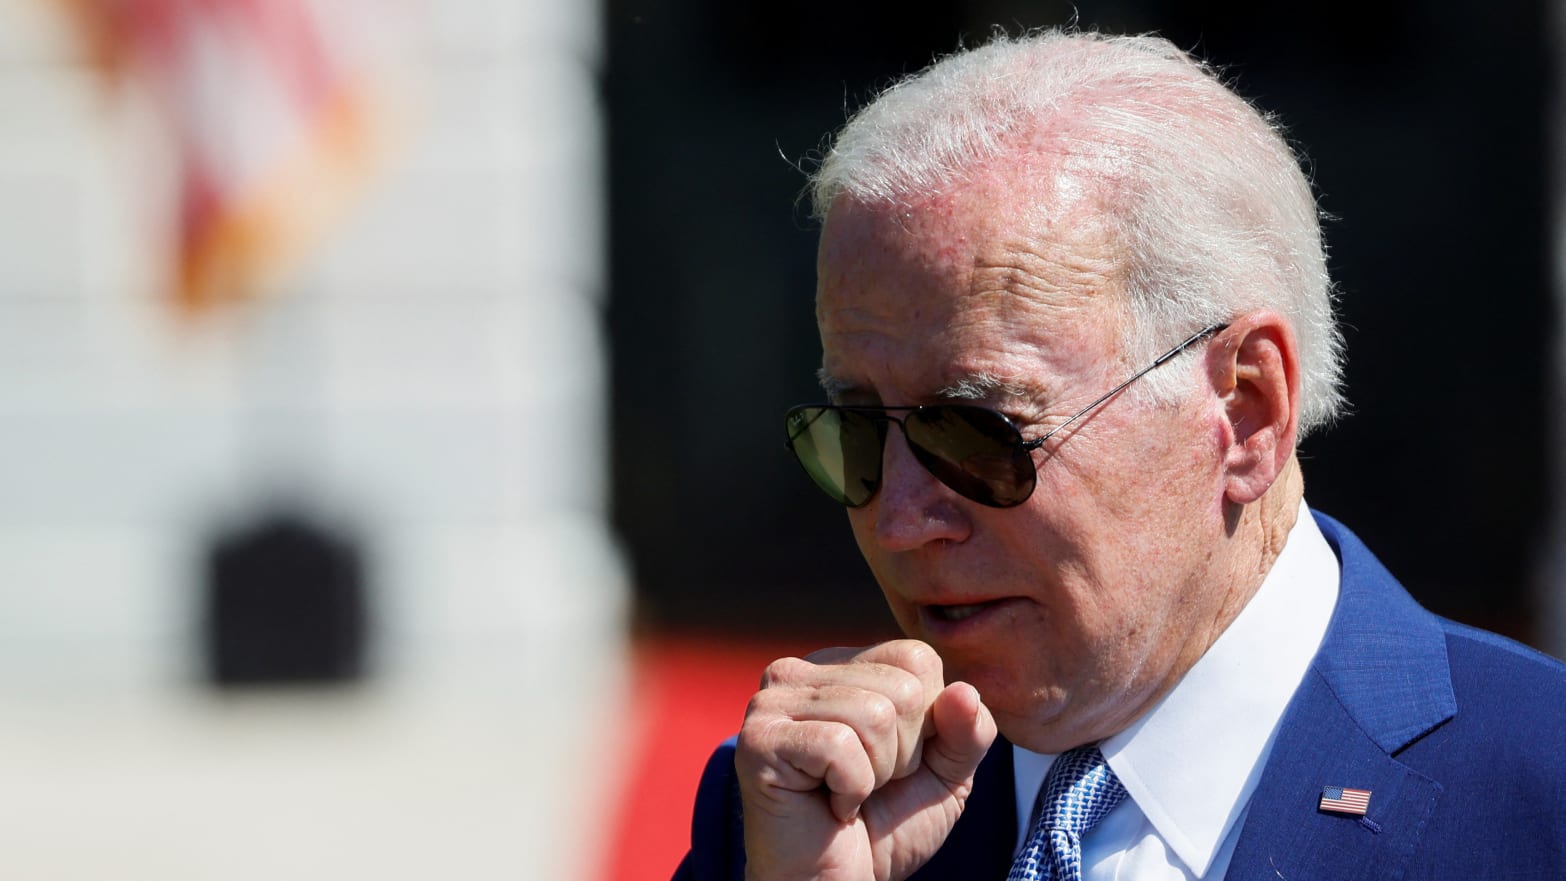 Joe Biden coughs into his hand at an event.